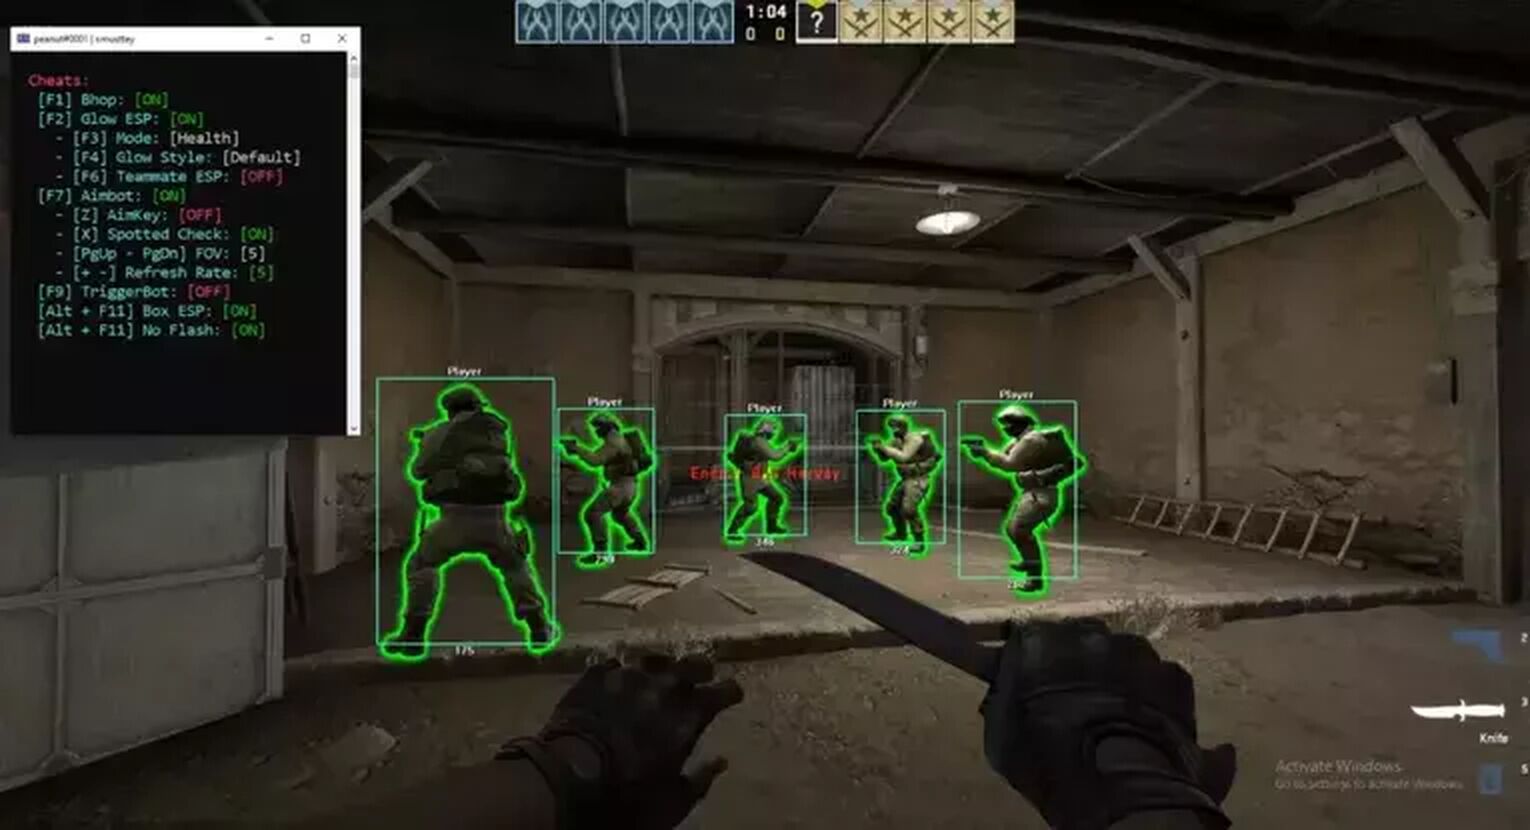 How to use a legal Aimbot in CS2 (CSGO)?